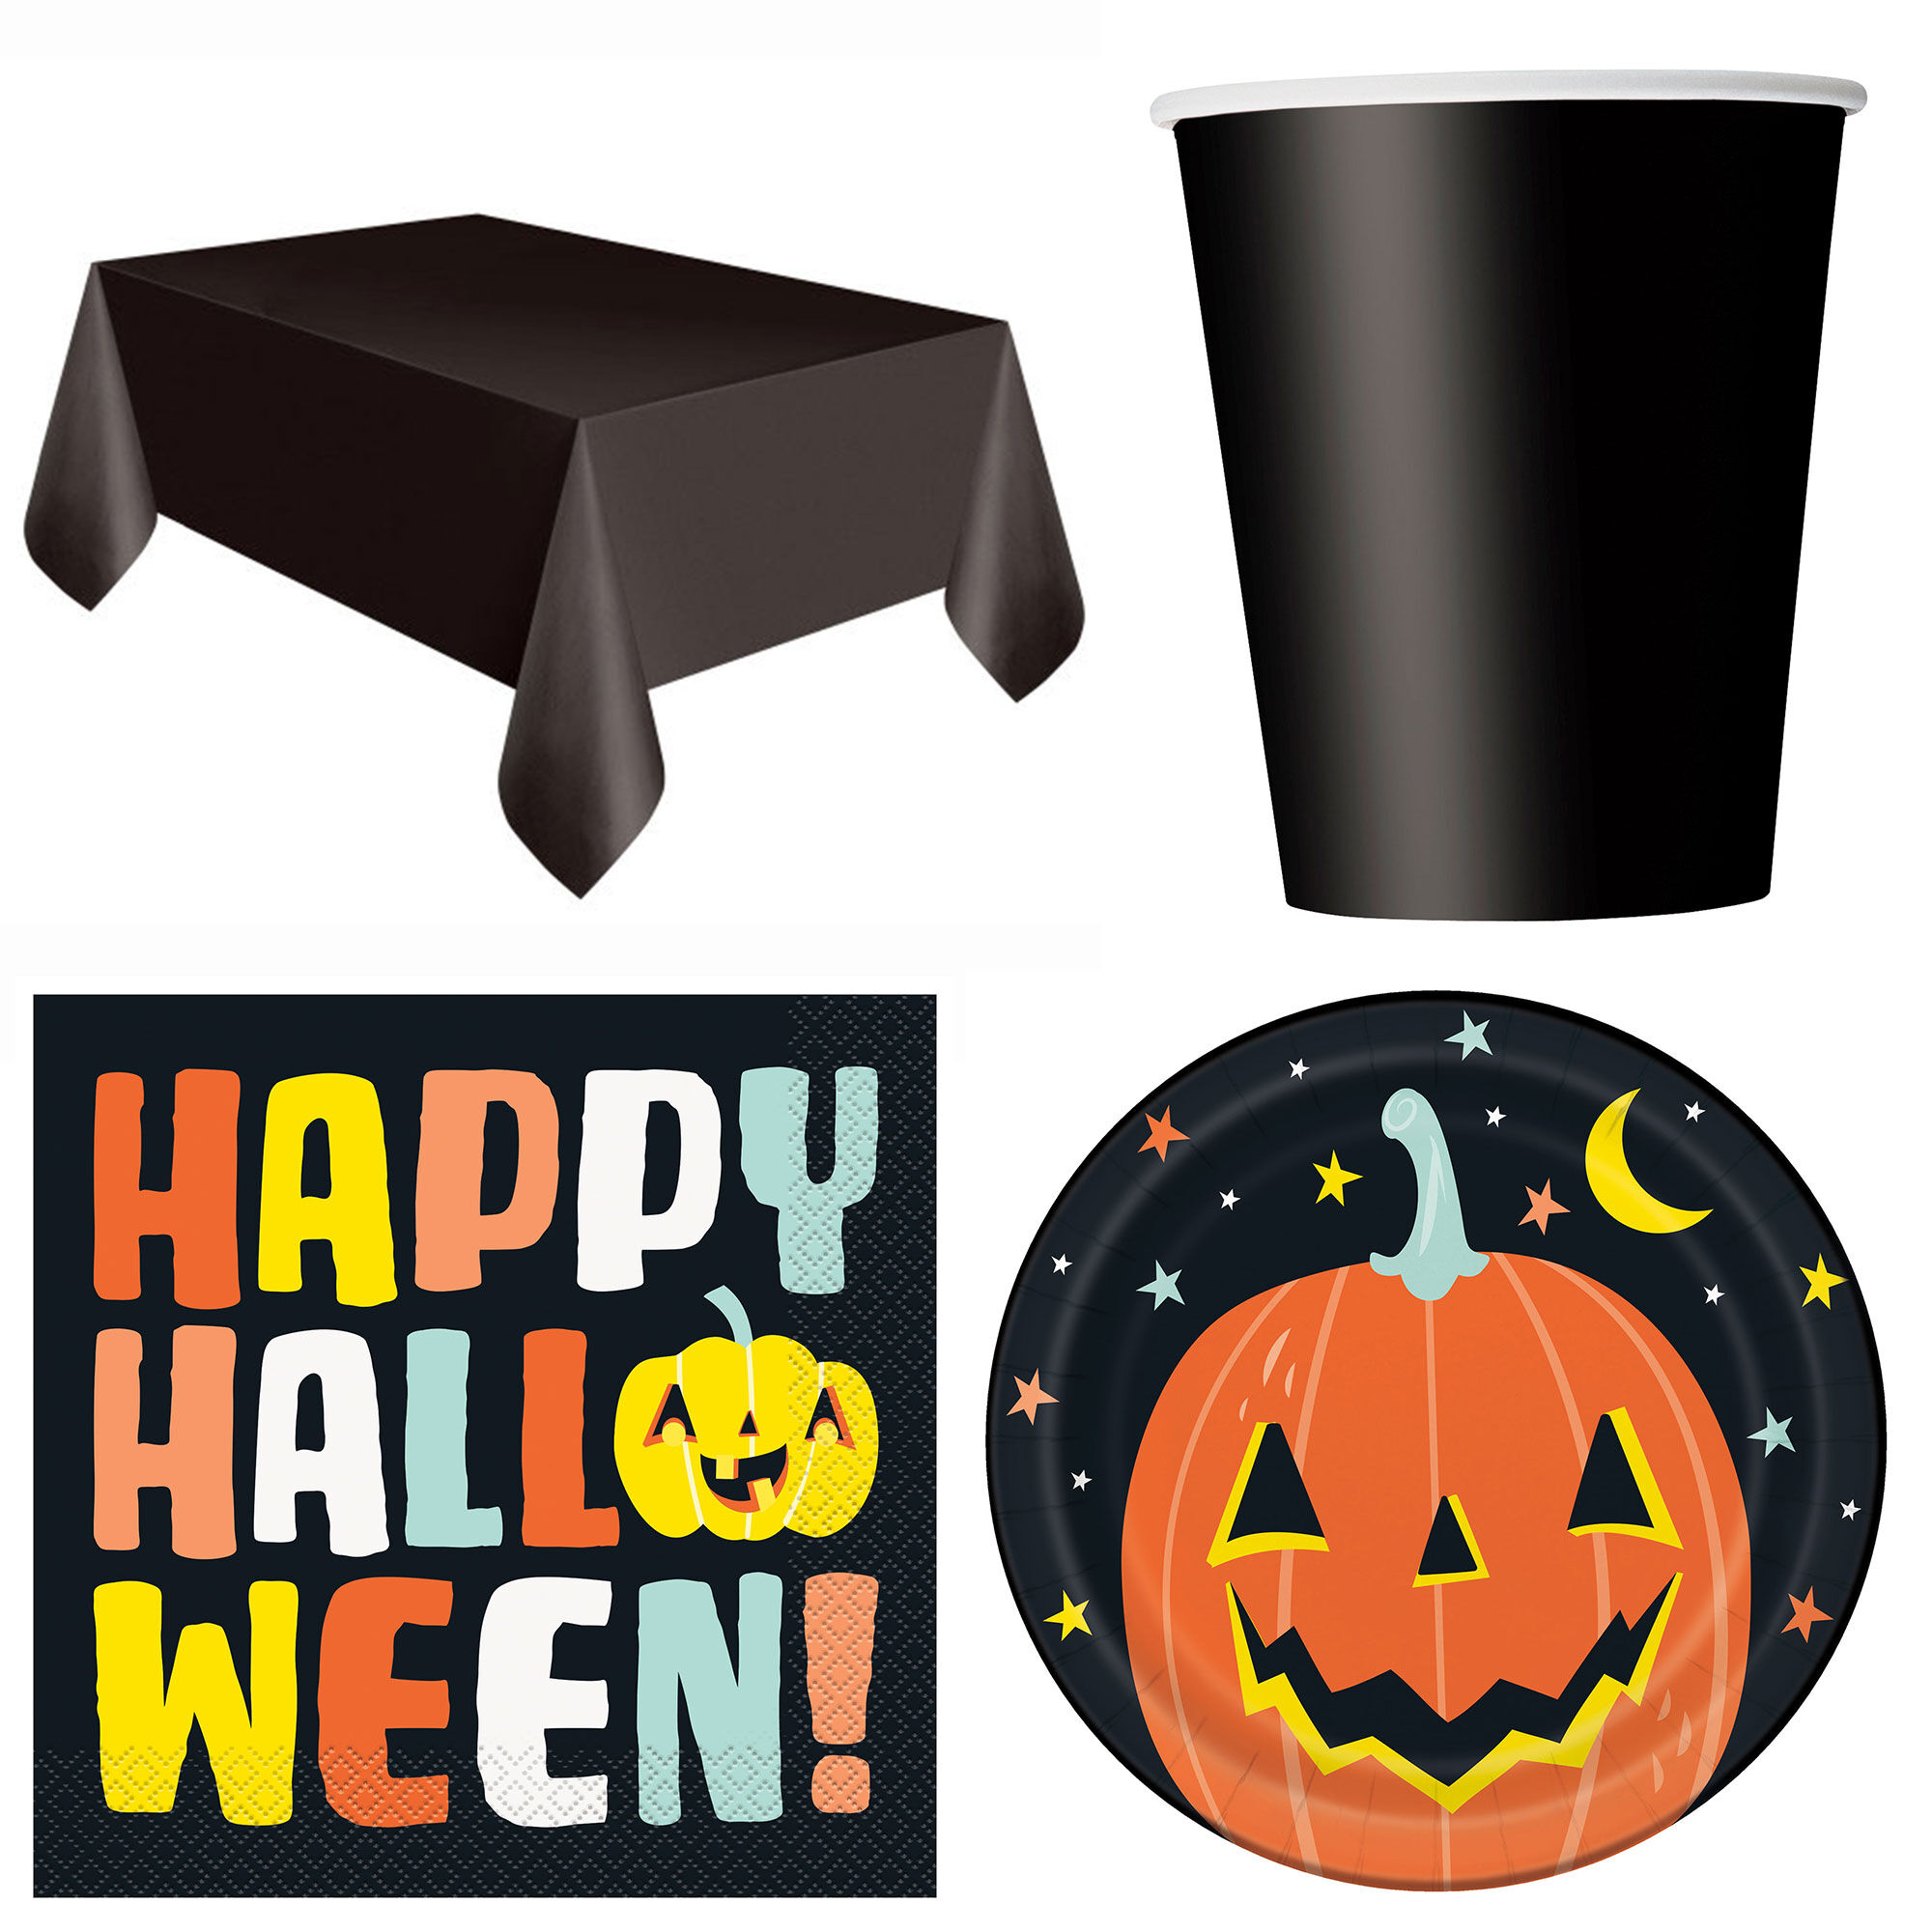 October Eve Halloween Party Supplies Pumpkin Jack O Lantern Party Bundle with Plates & Napkins for 16 Guests 